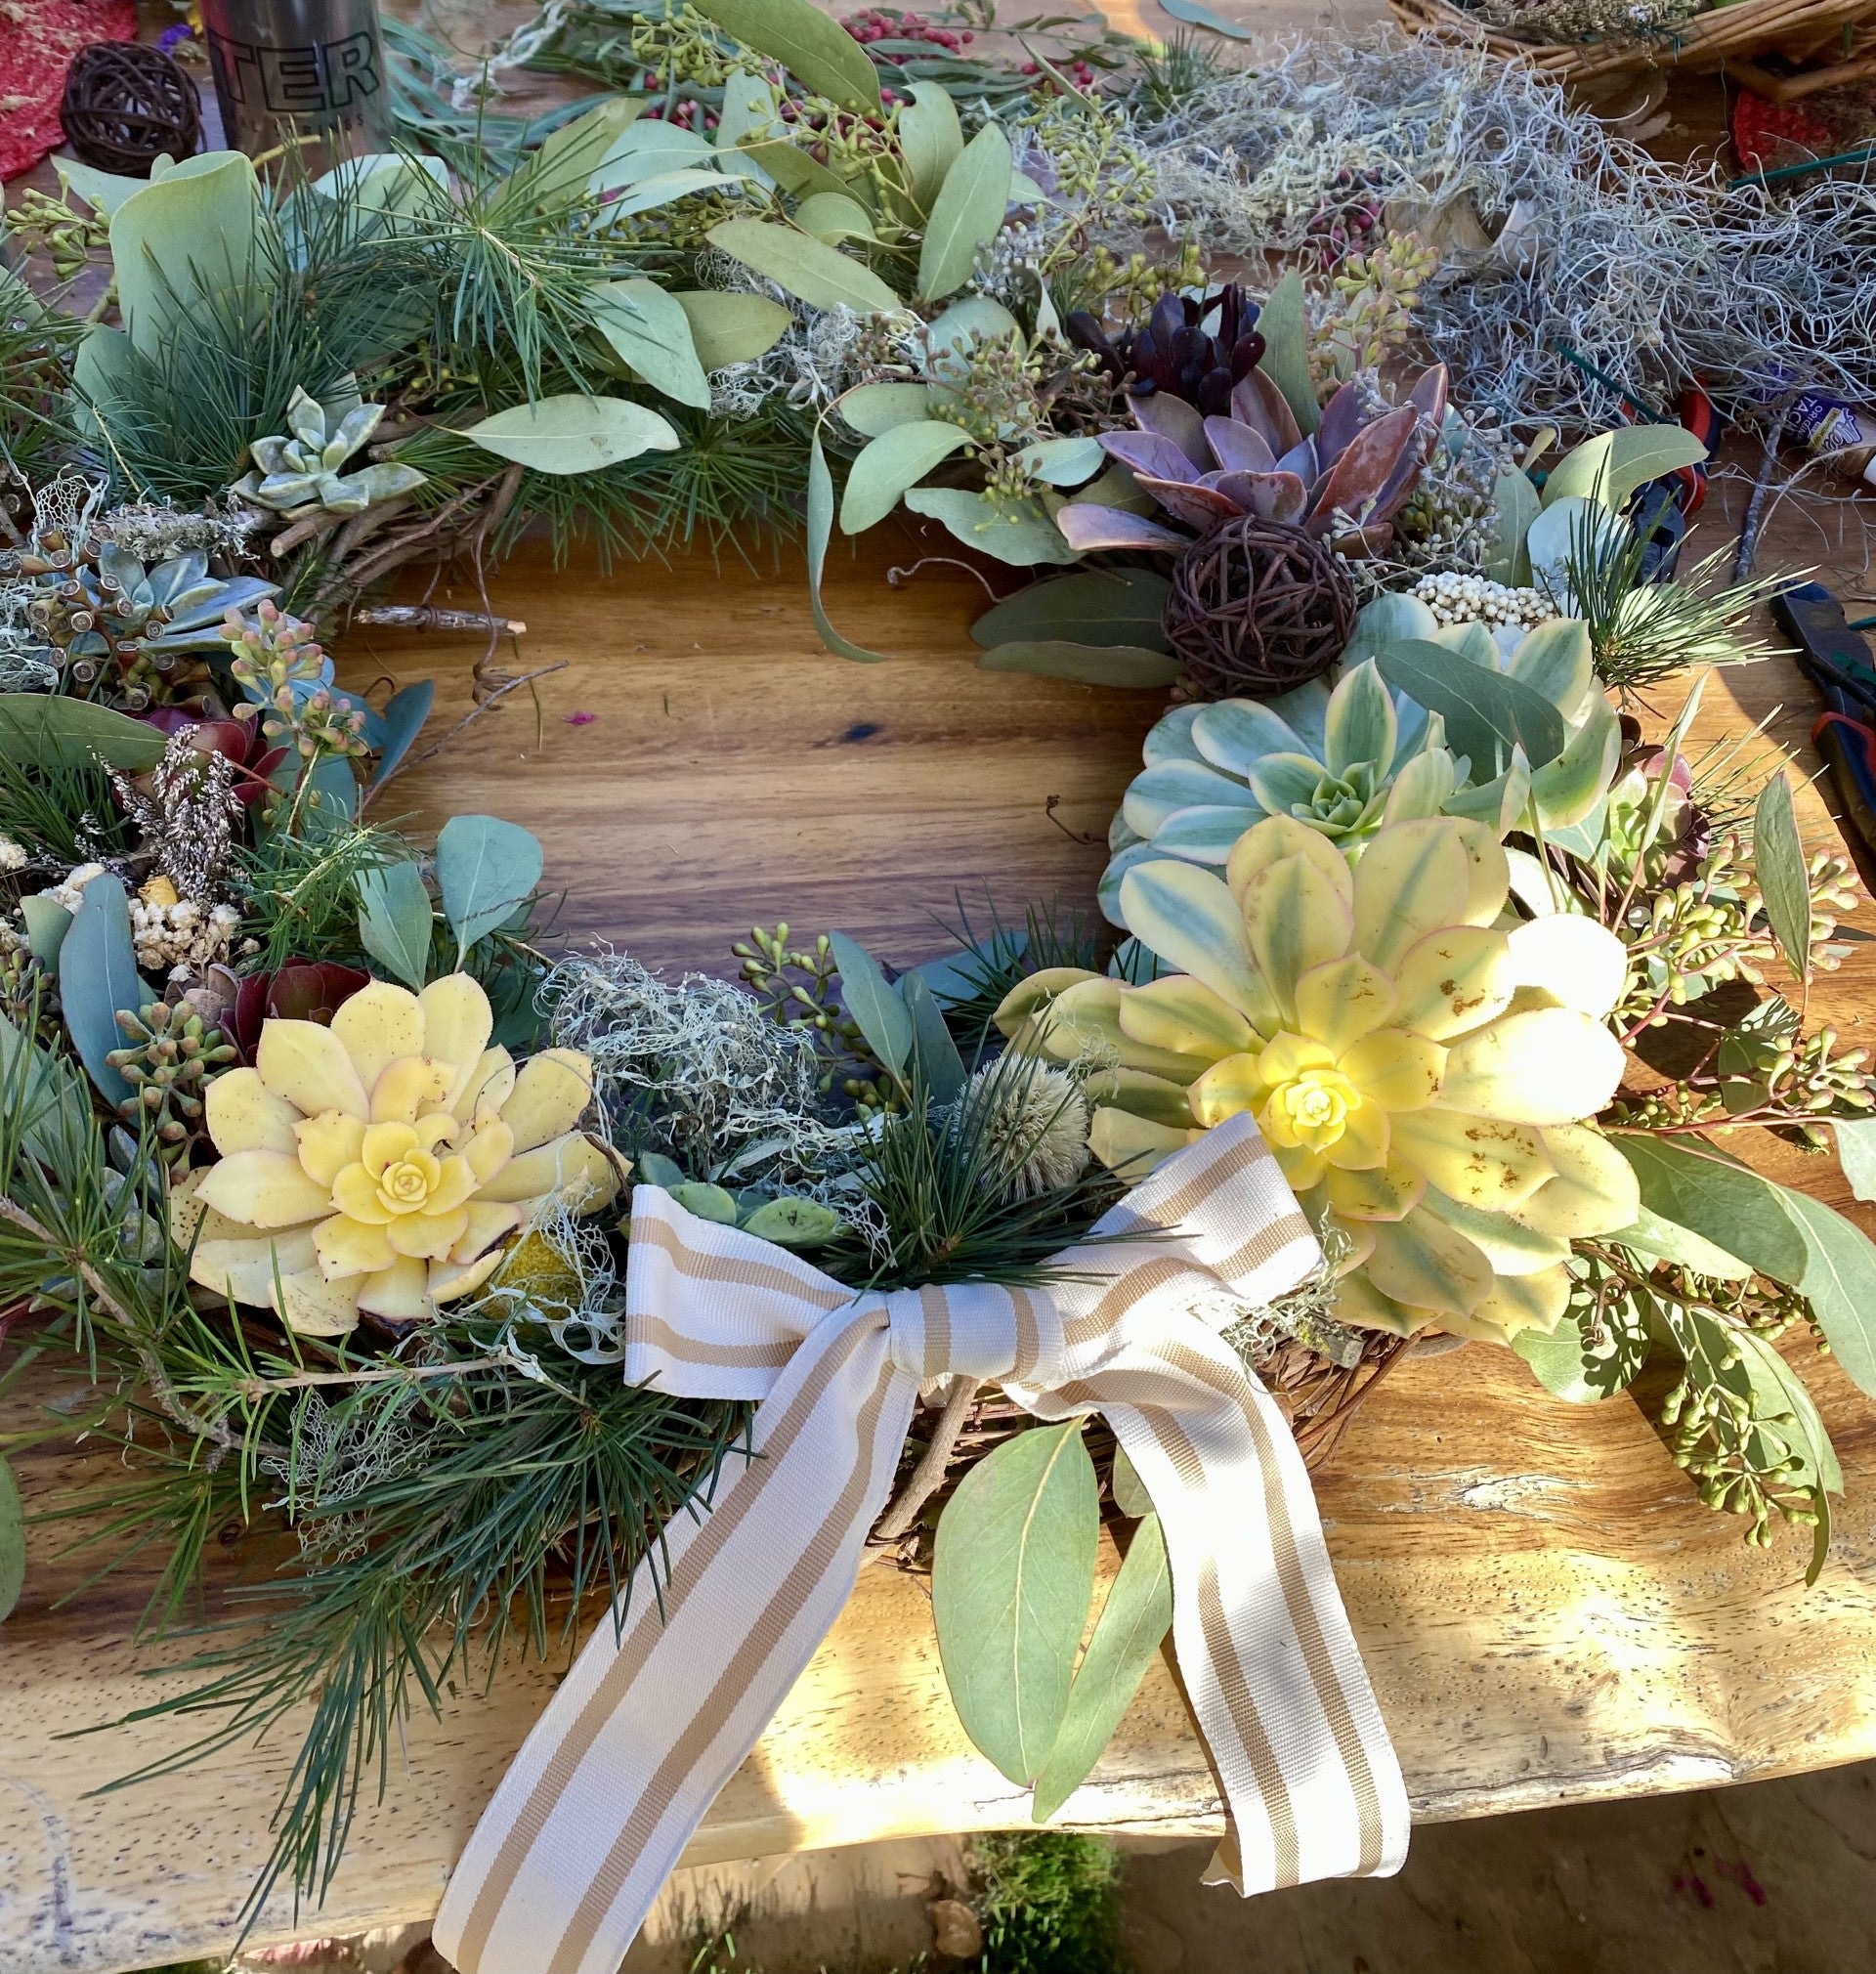 Workshop - Living Wreaths with Dawn O'Donnell - Saturday, March 23